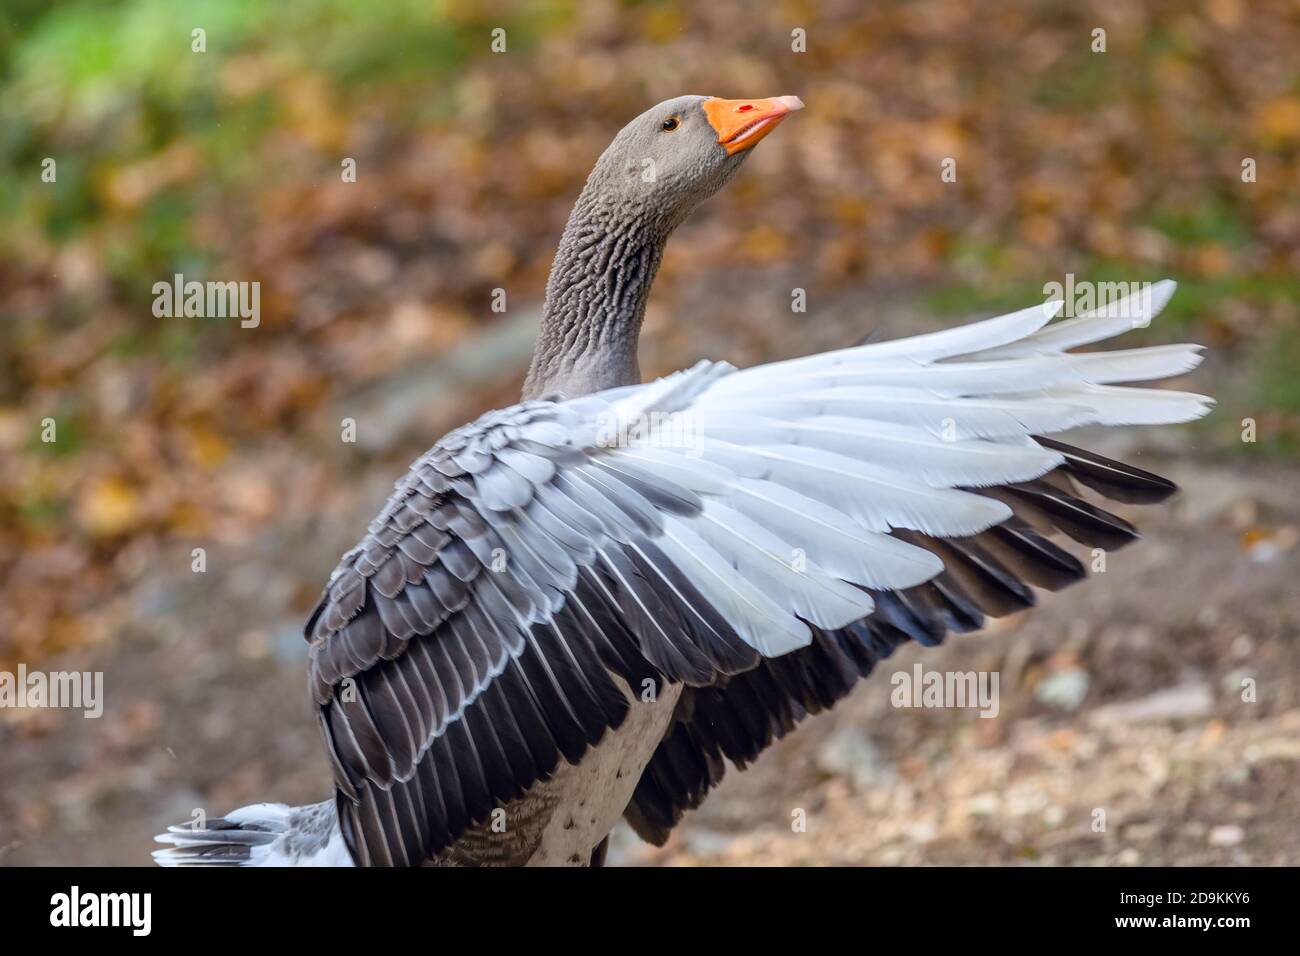 Close up image of a domestic grey and white coloured landaise goose with bright orange beak flapping its wings. Blurry green, brown, yellow background. Stock Photo